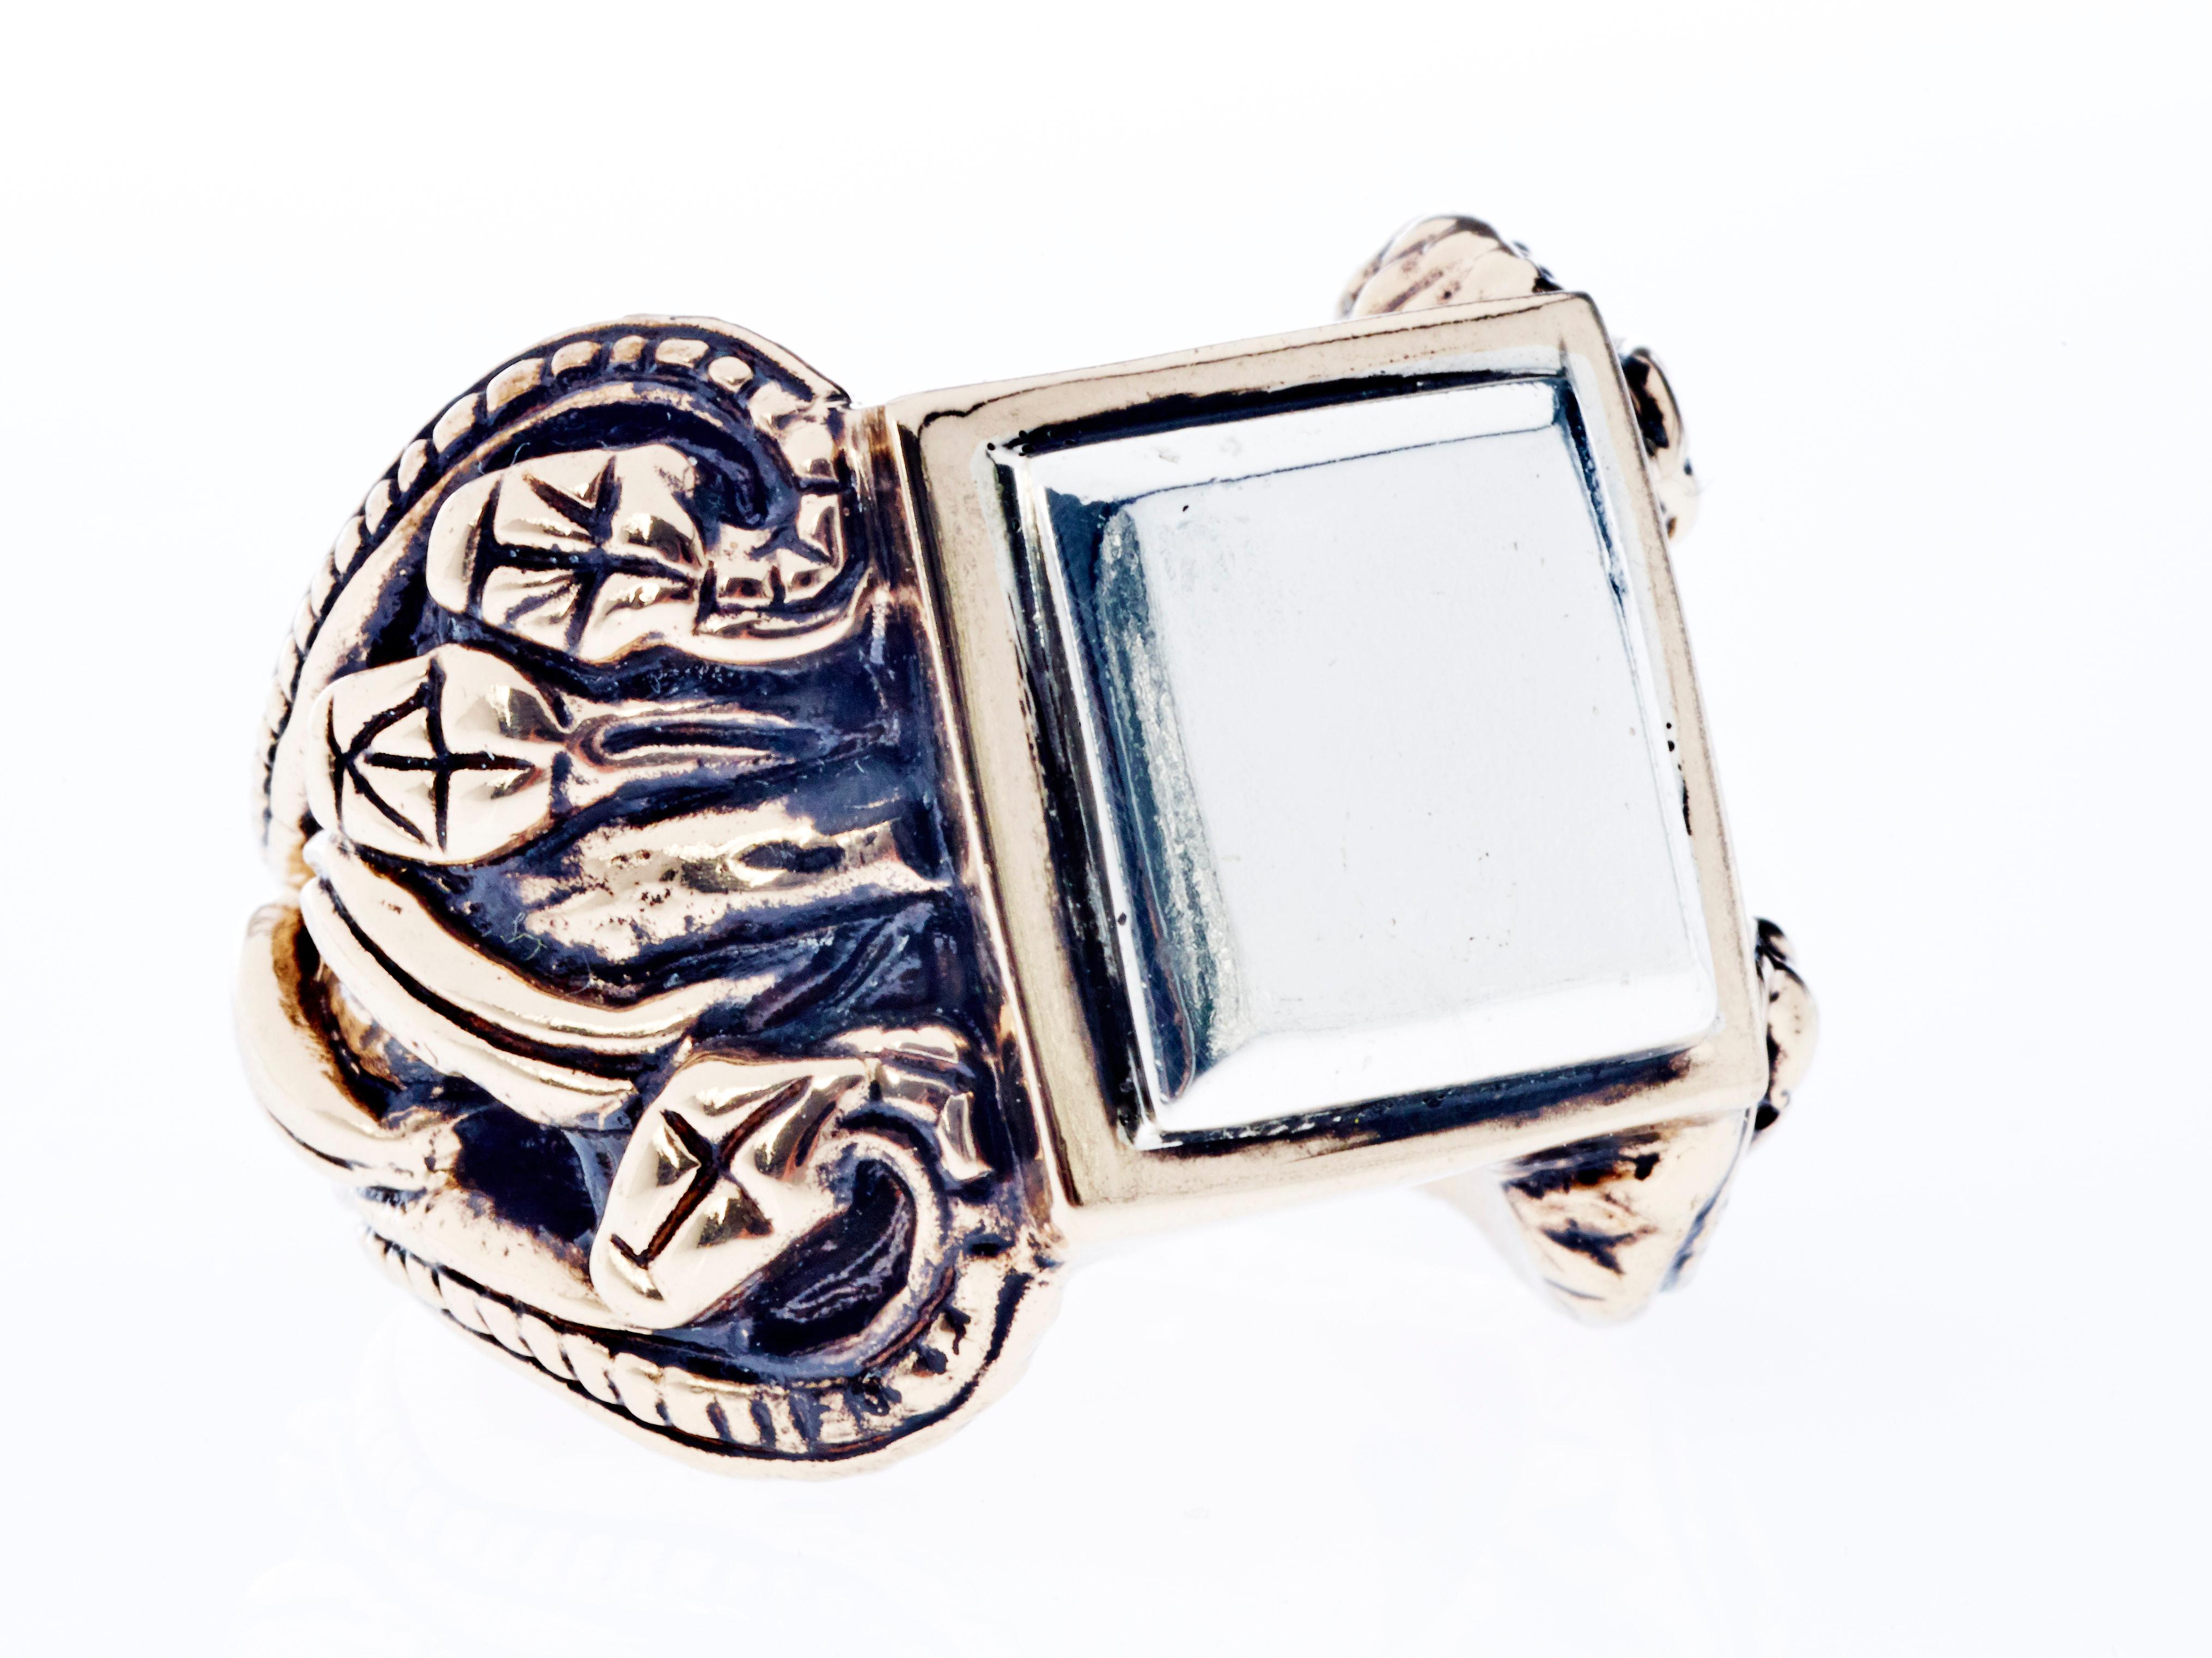 Crest Snake Ring Victorian Style Antique Silver Bronze J Dauphin

J DAUPHIN statement ring made in bronze and silver with antique plating.

The serpent, or snake, is one of the oldest and most widespread mythological symbols. 
Historically, serpents